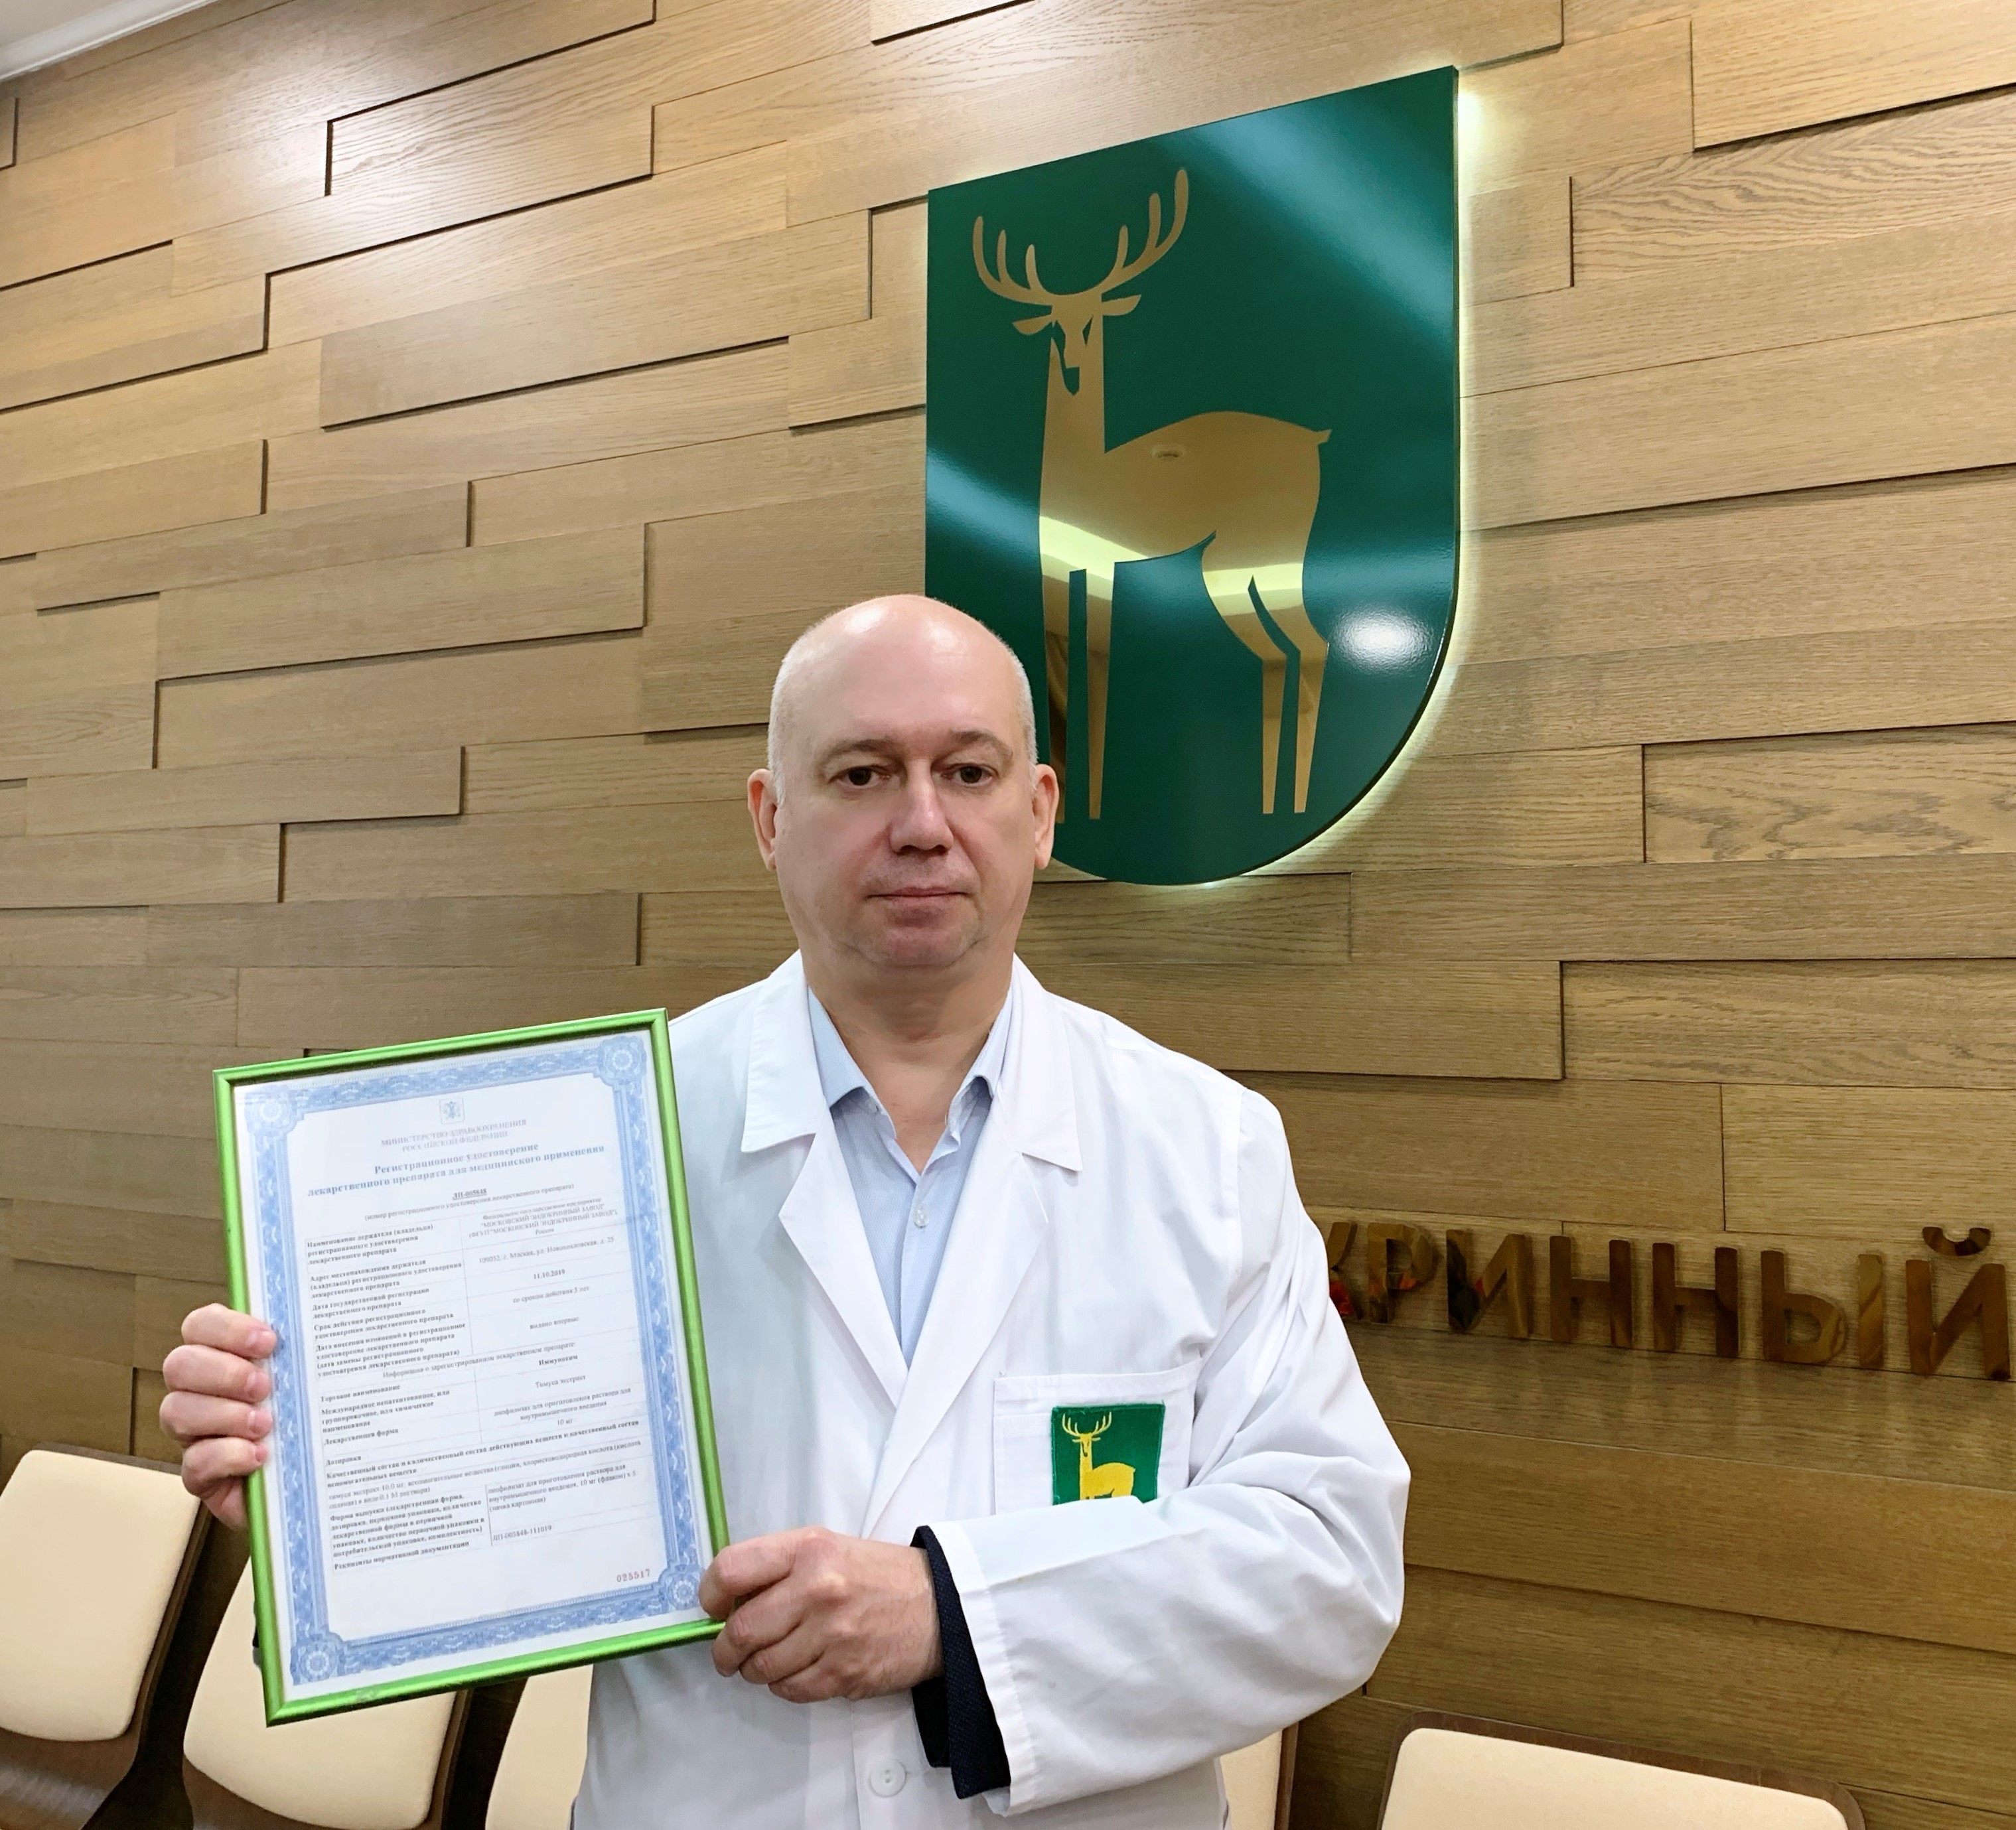 FSUE Moscow Endocrine Plant obtained the marketing authorization for the medicinal product “Immunotim, lyophilizate for preparation of solution for intramuscular injection, 10 mg”.